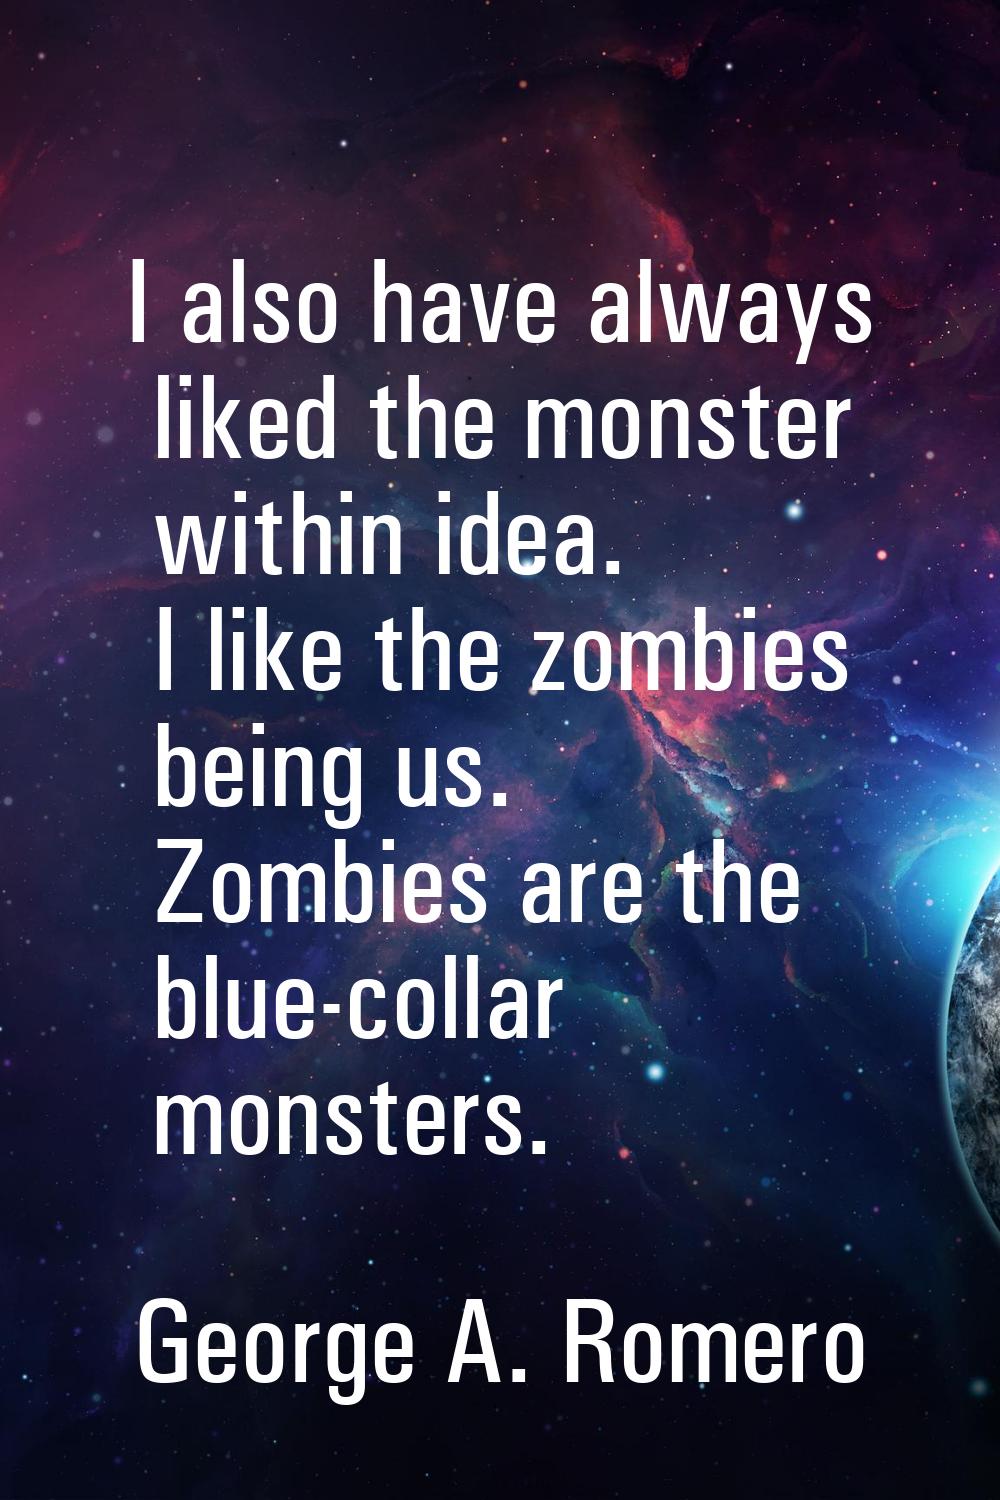 I also have always liked the monster within idea. I like the zombies being us. Zombies are the blue